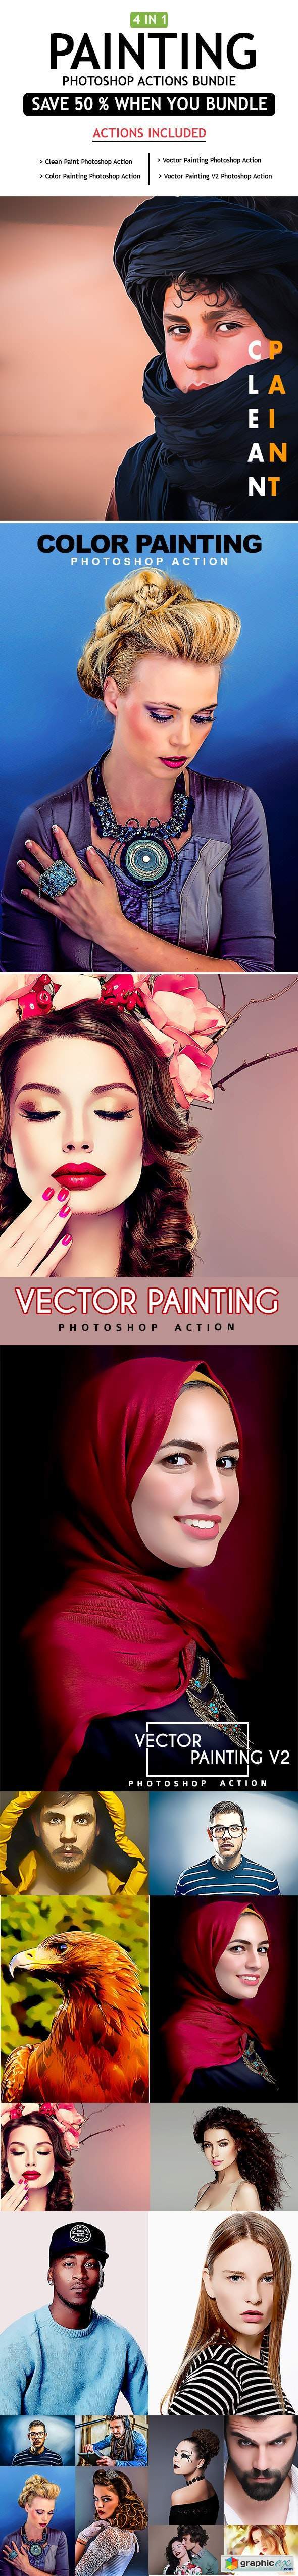 Painting 4 IN 1 Photoshop Actions Bundle